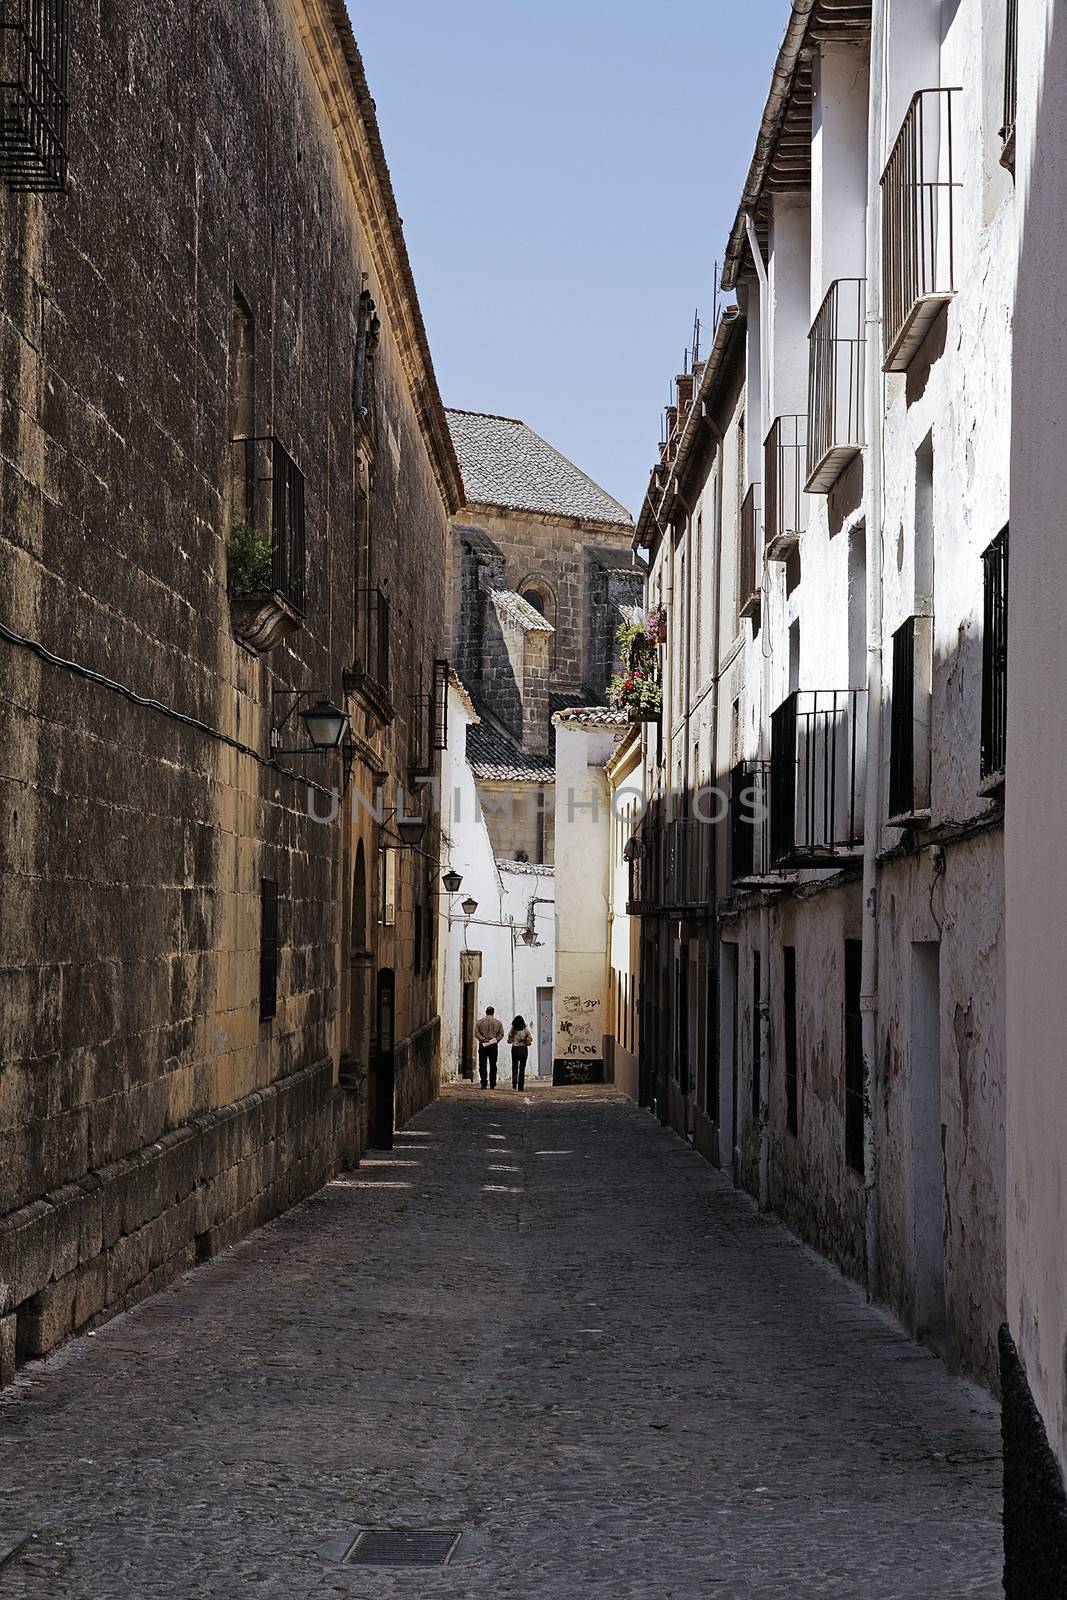 Street of Ubeda, Jaen province, Andalusia, Spain